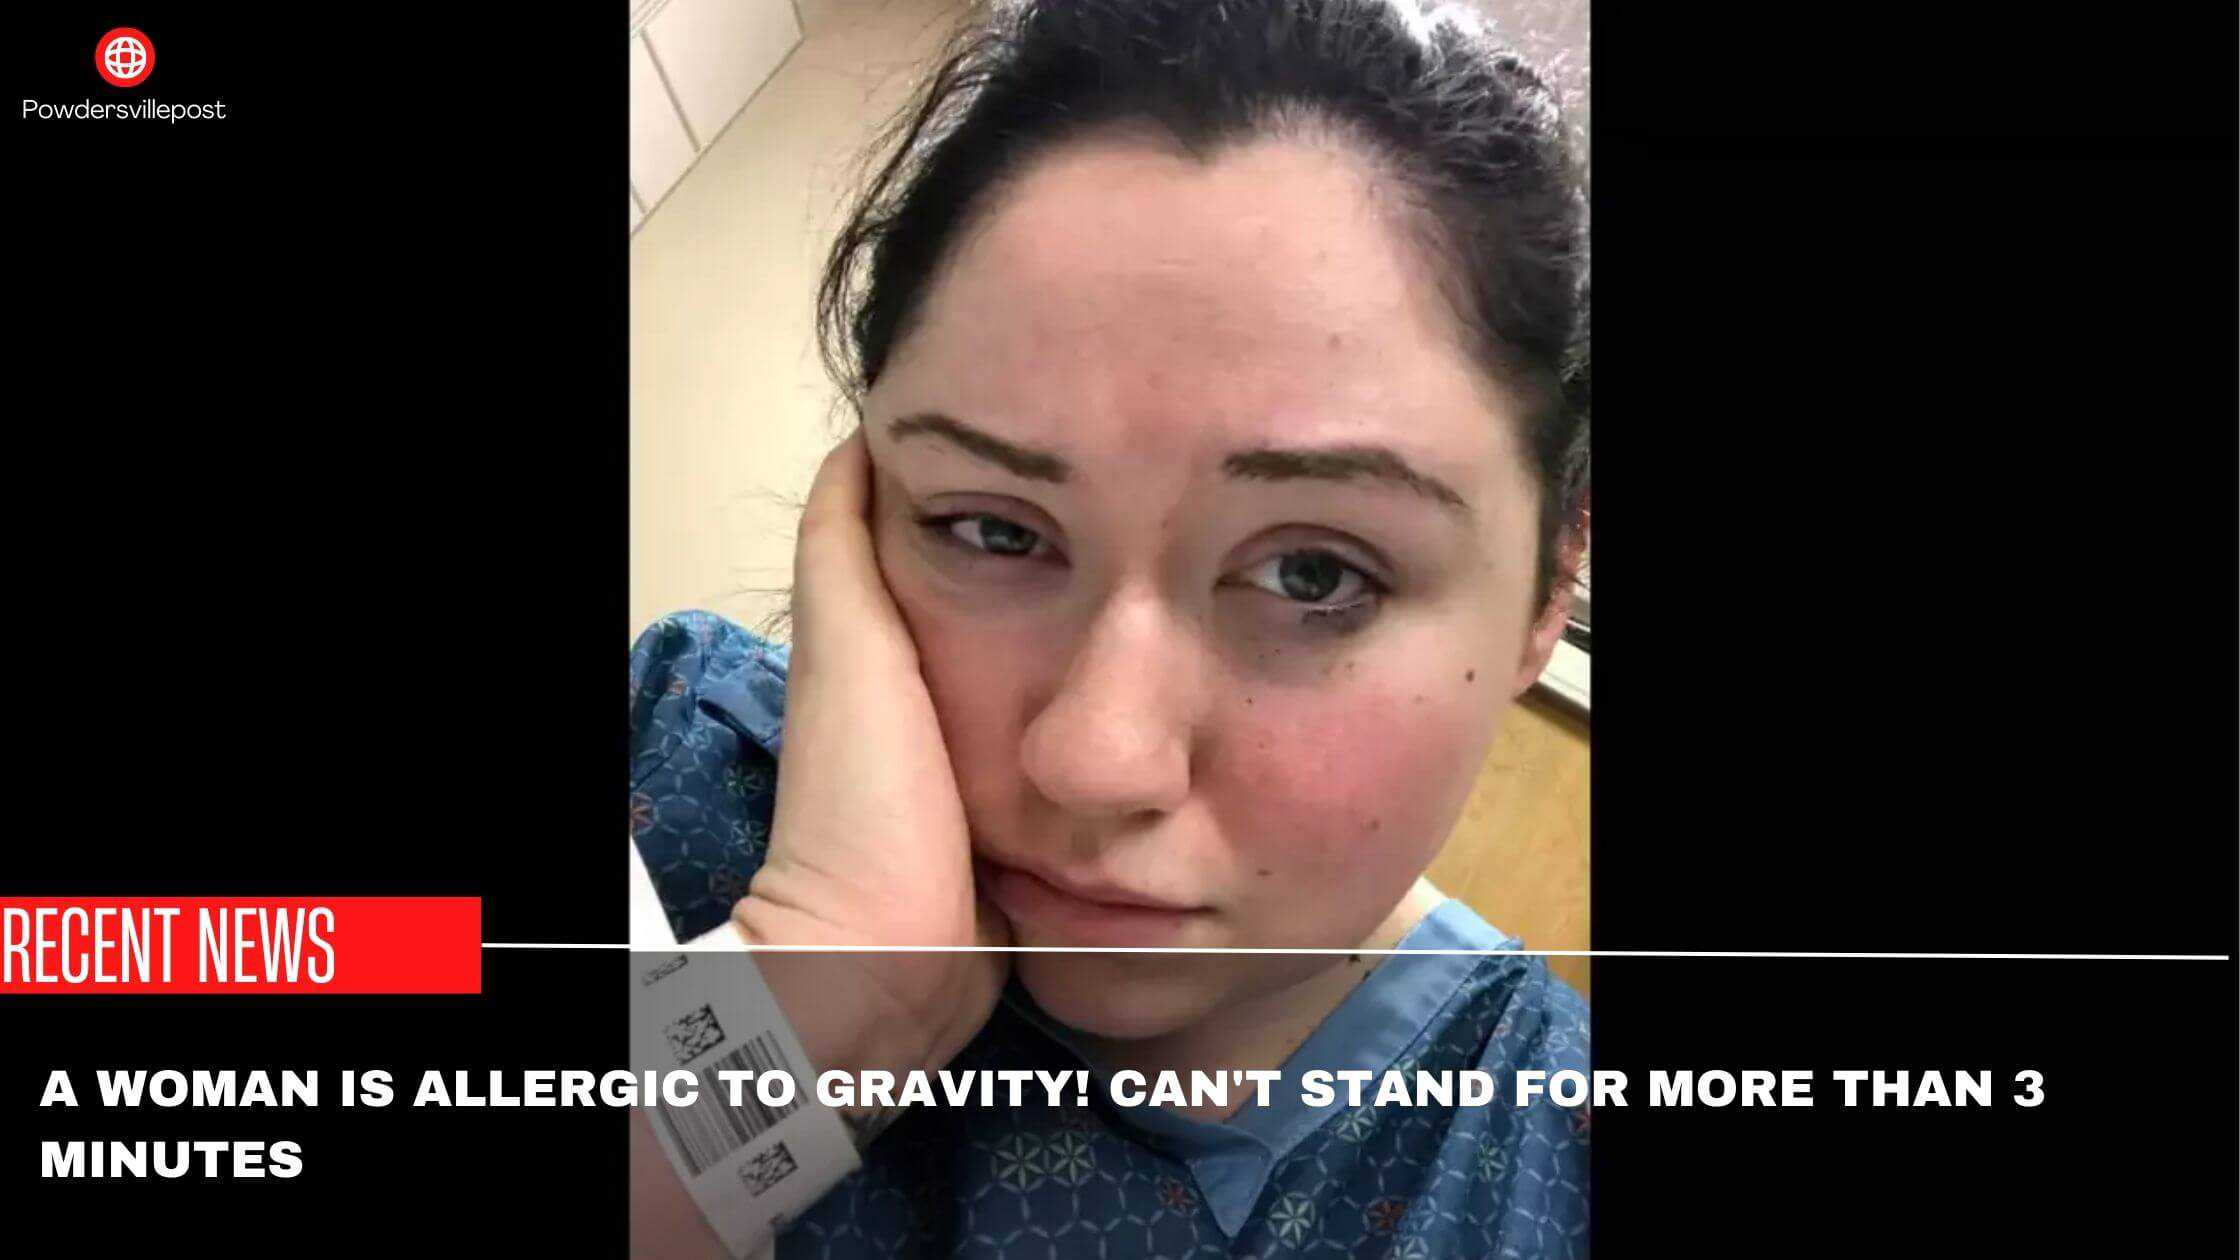 A Woman Is Allergic To Gravity! Can't Stand For More Than 3 Minutes